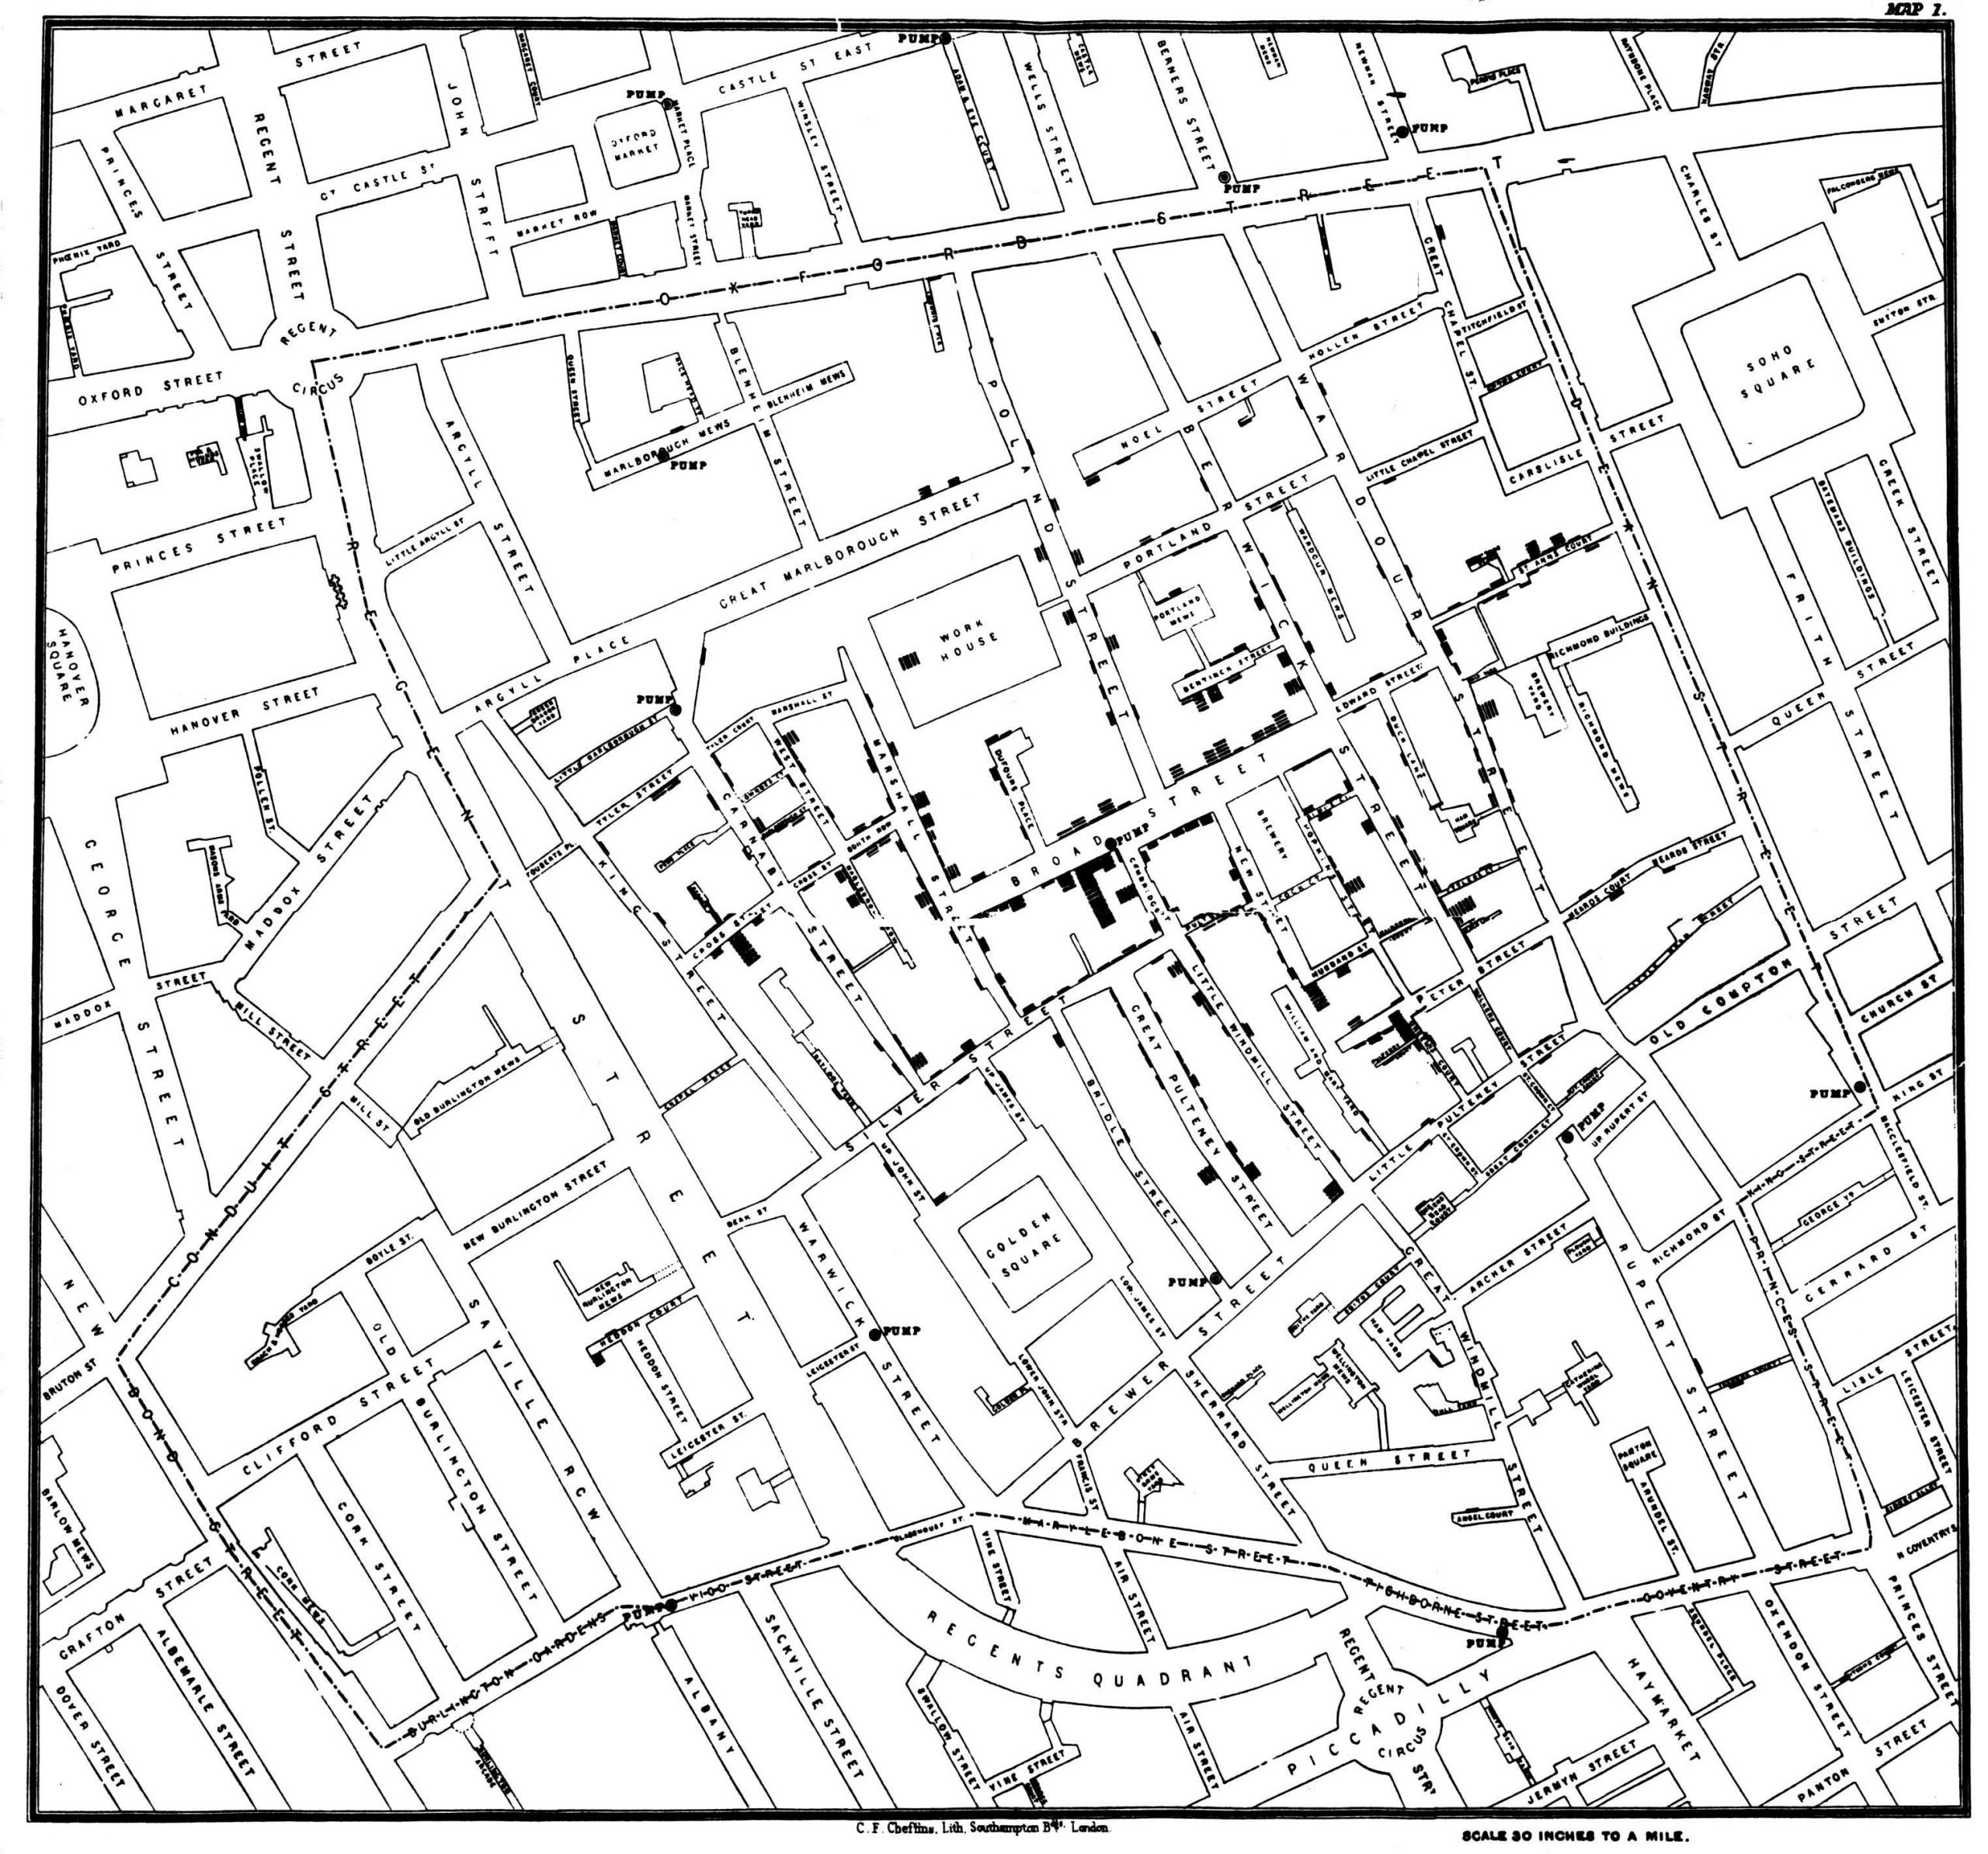 Map of London, England from 1854 drawn to show clusters of Cholera outbreak